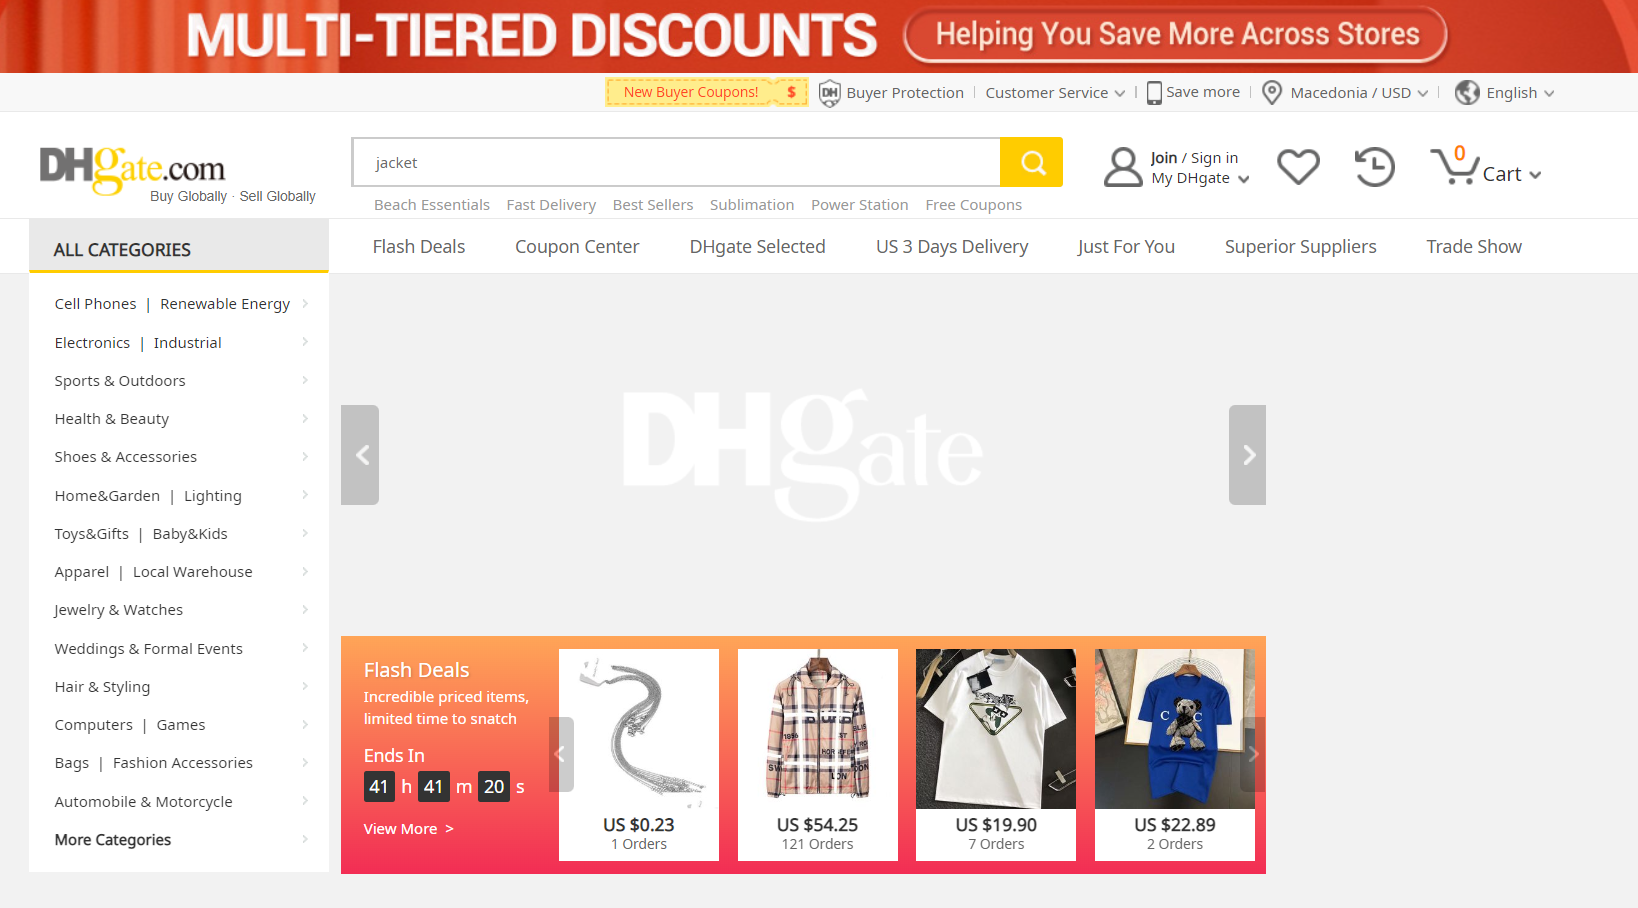 How to Check DHgate Reviews and Buy Safely - EJET Sourcing